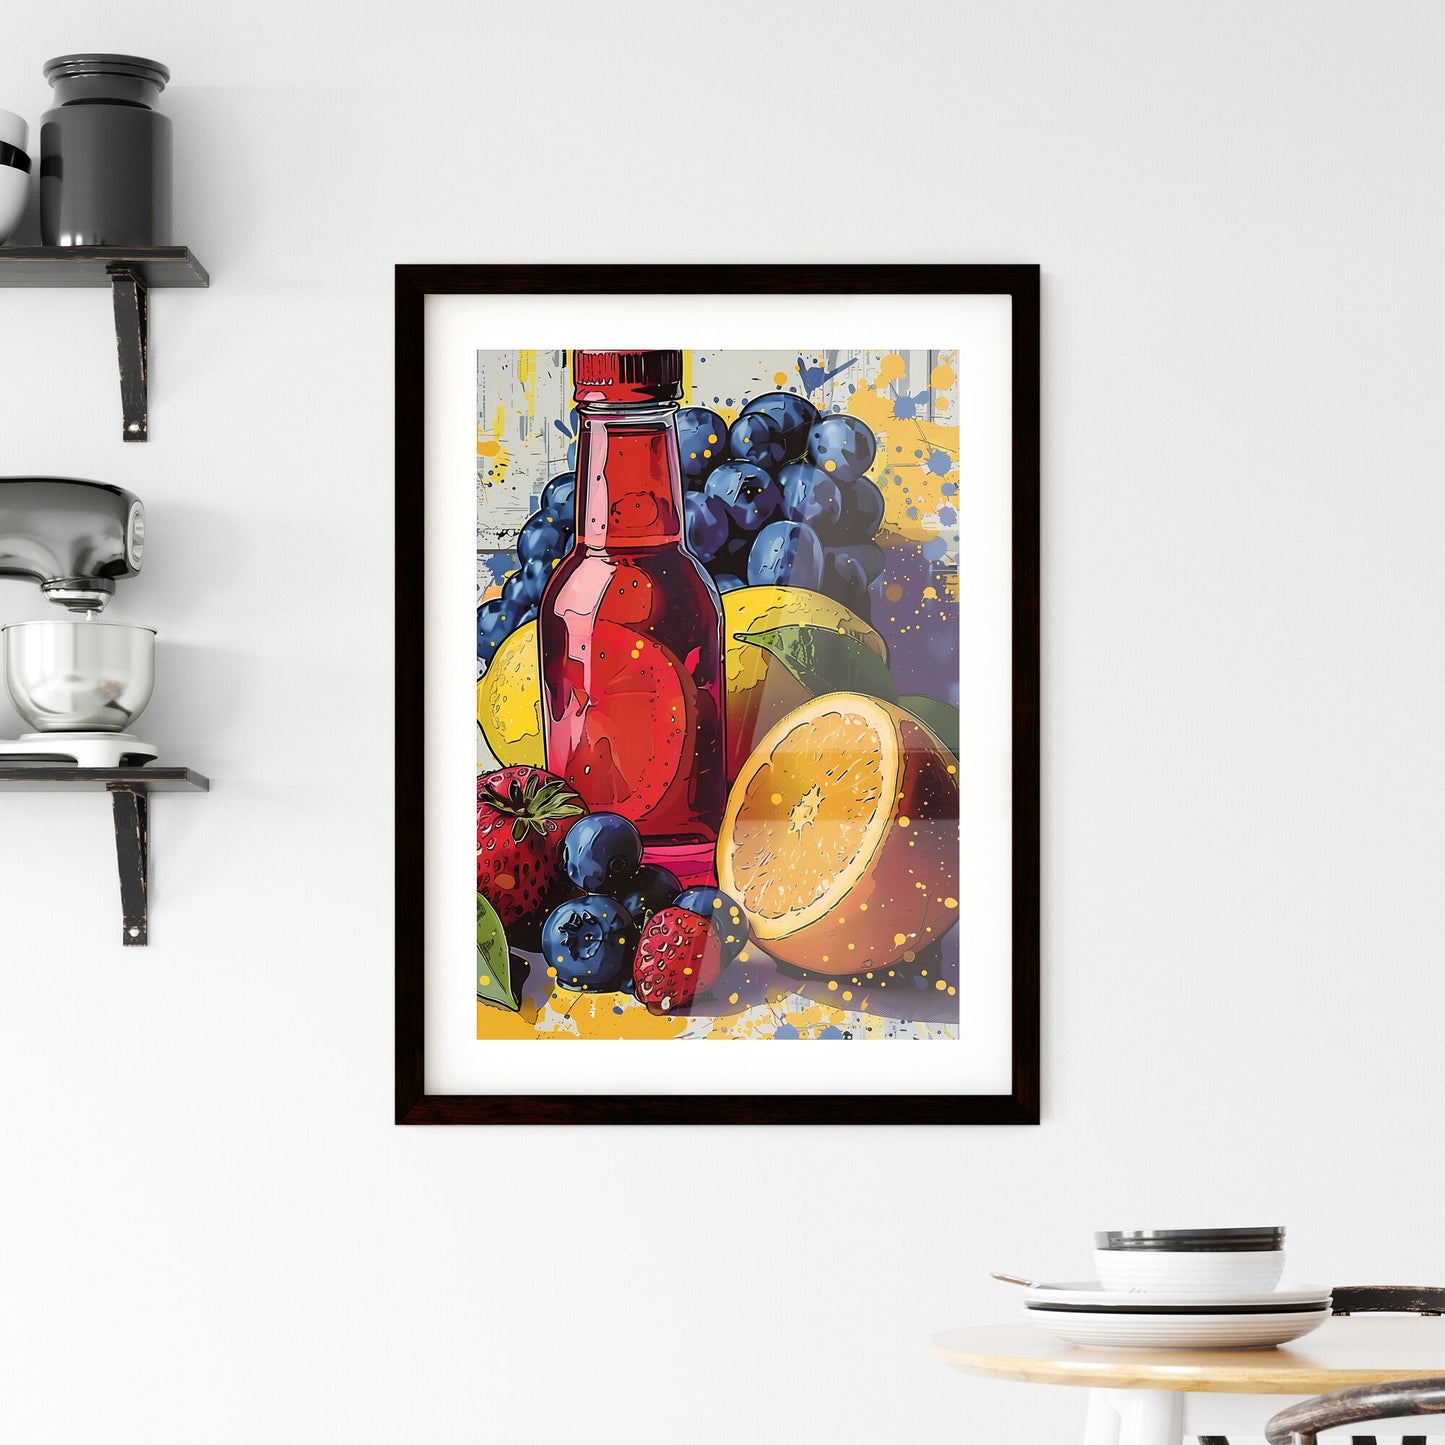 Minimalistic Pop Art Painting: Bold Colors, Modern Objects, Comic Style, Classic Still Life in Consumer Culture, Fruit and Juice Default Title